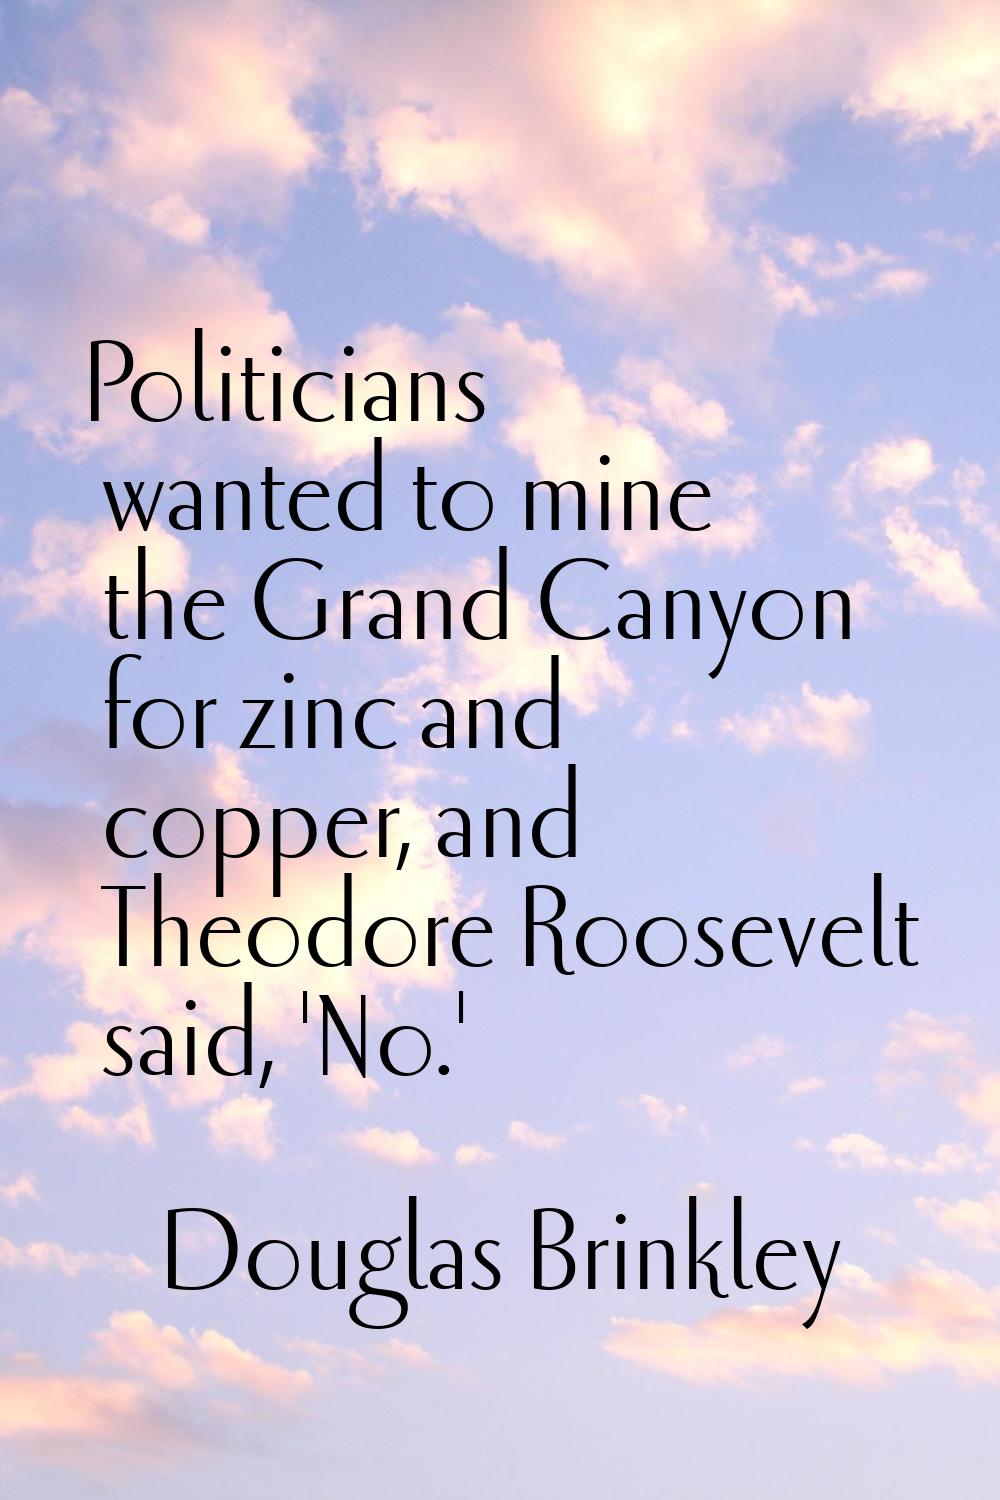 Politicians wanted to mine the Grand Canyon for zinc and copper, and Theodore Roosevelt said, 'No.'